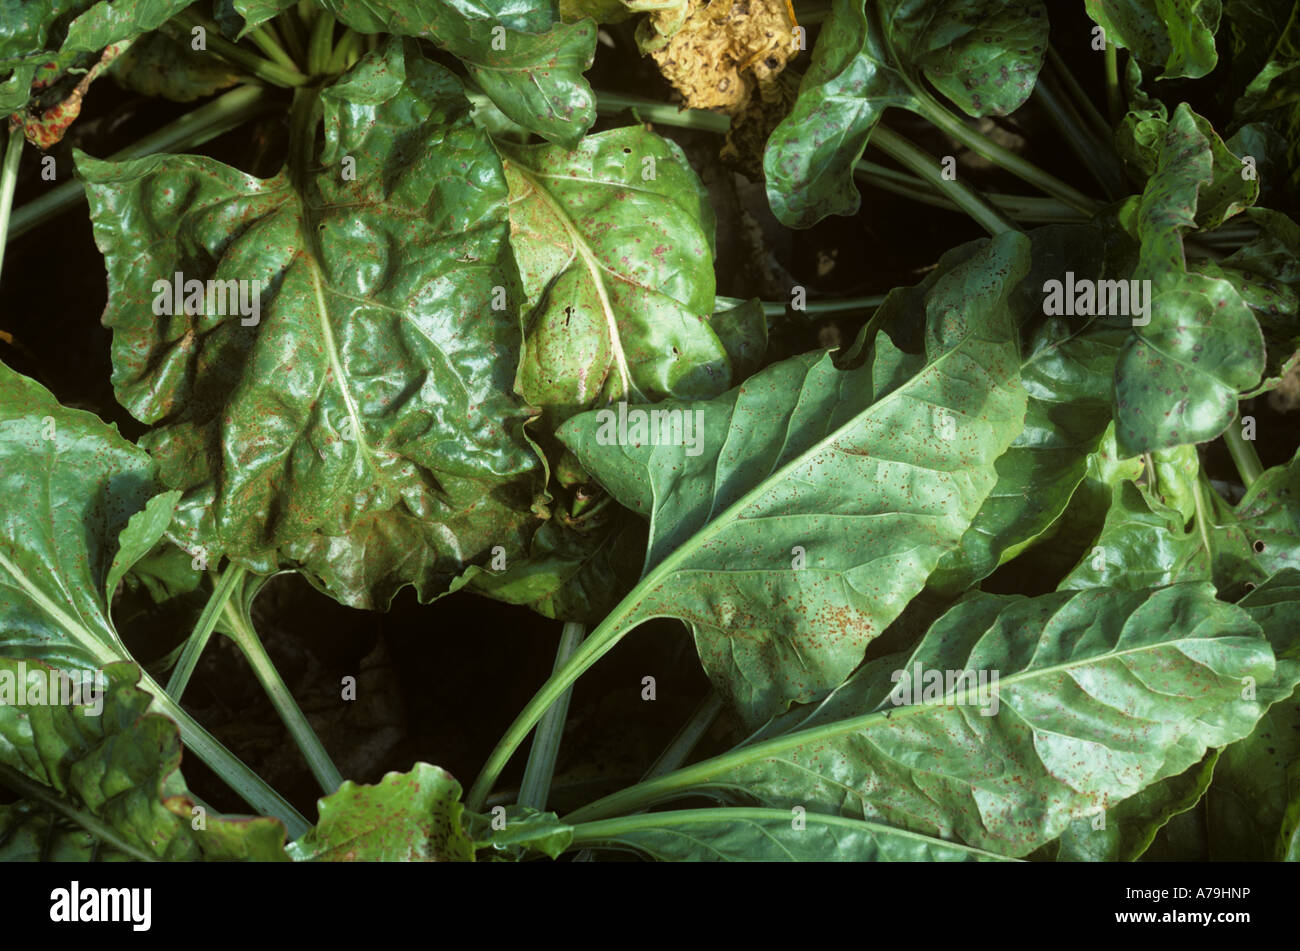 Sugar beet rust Uromyces betae infection on maturing crop leaves Stock Photo